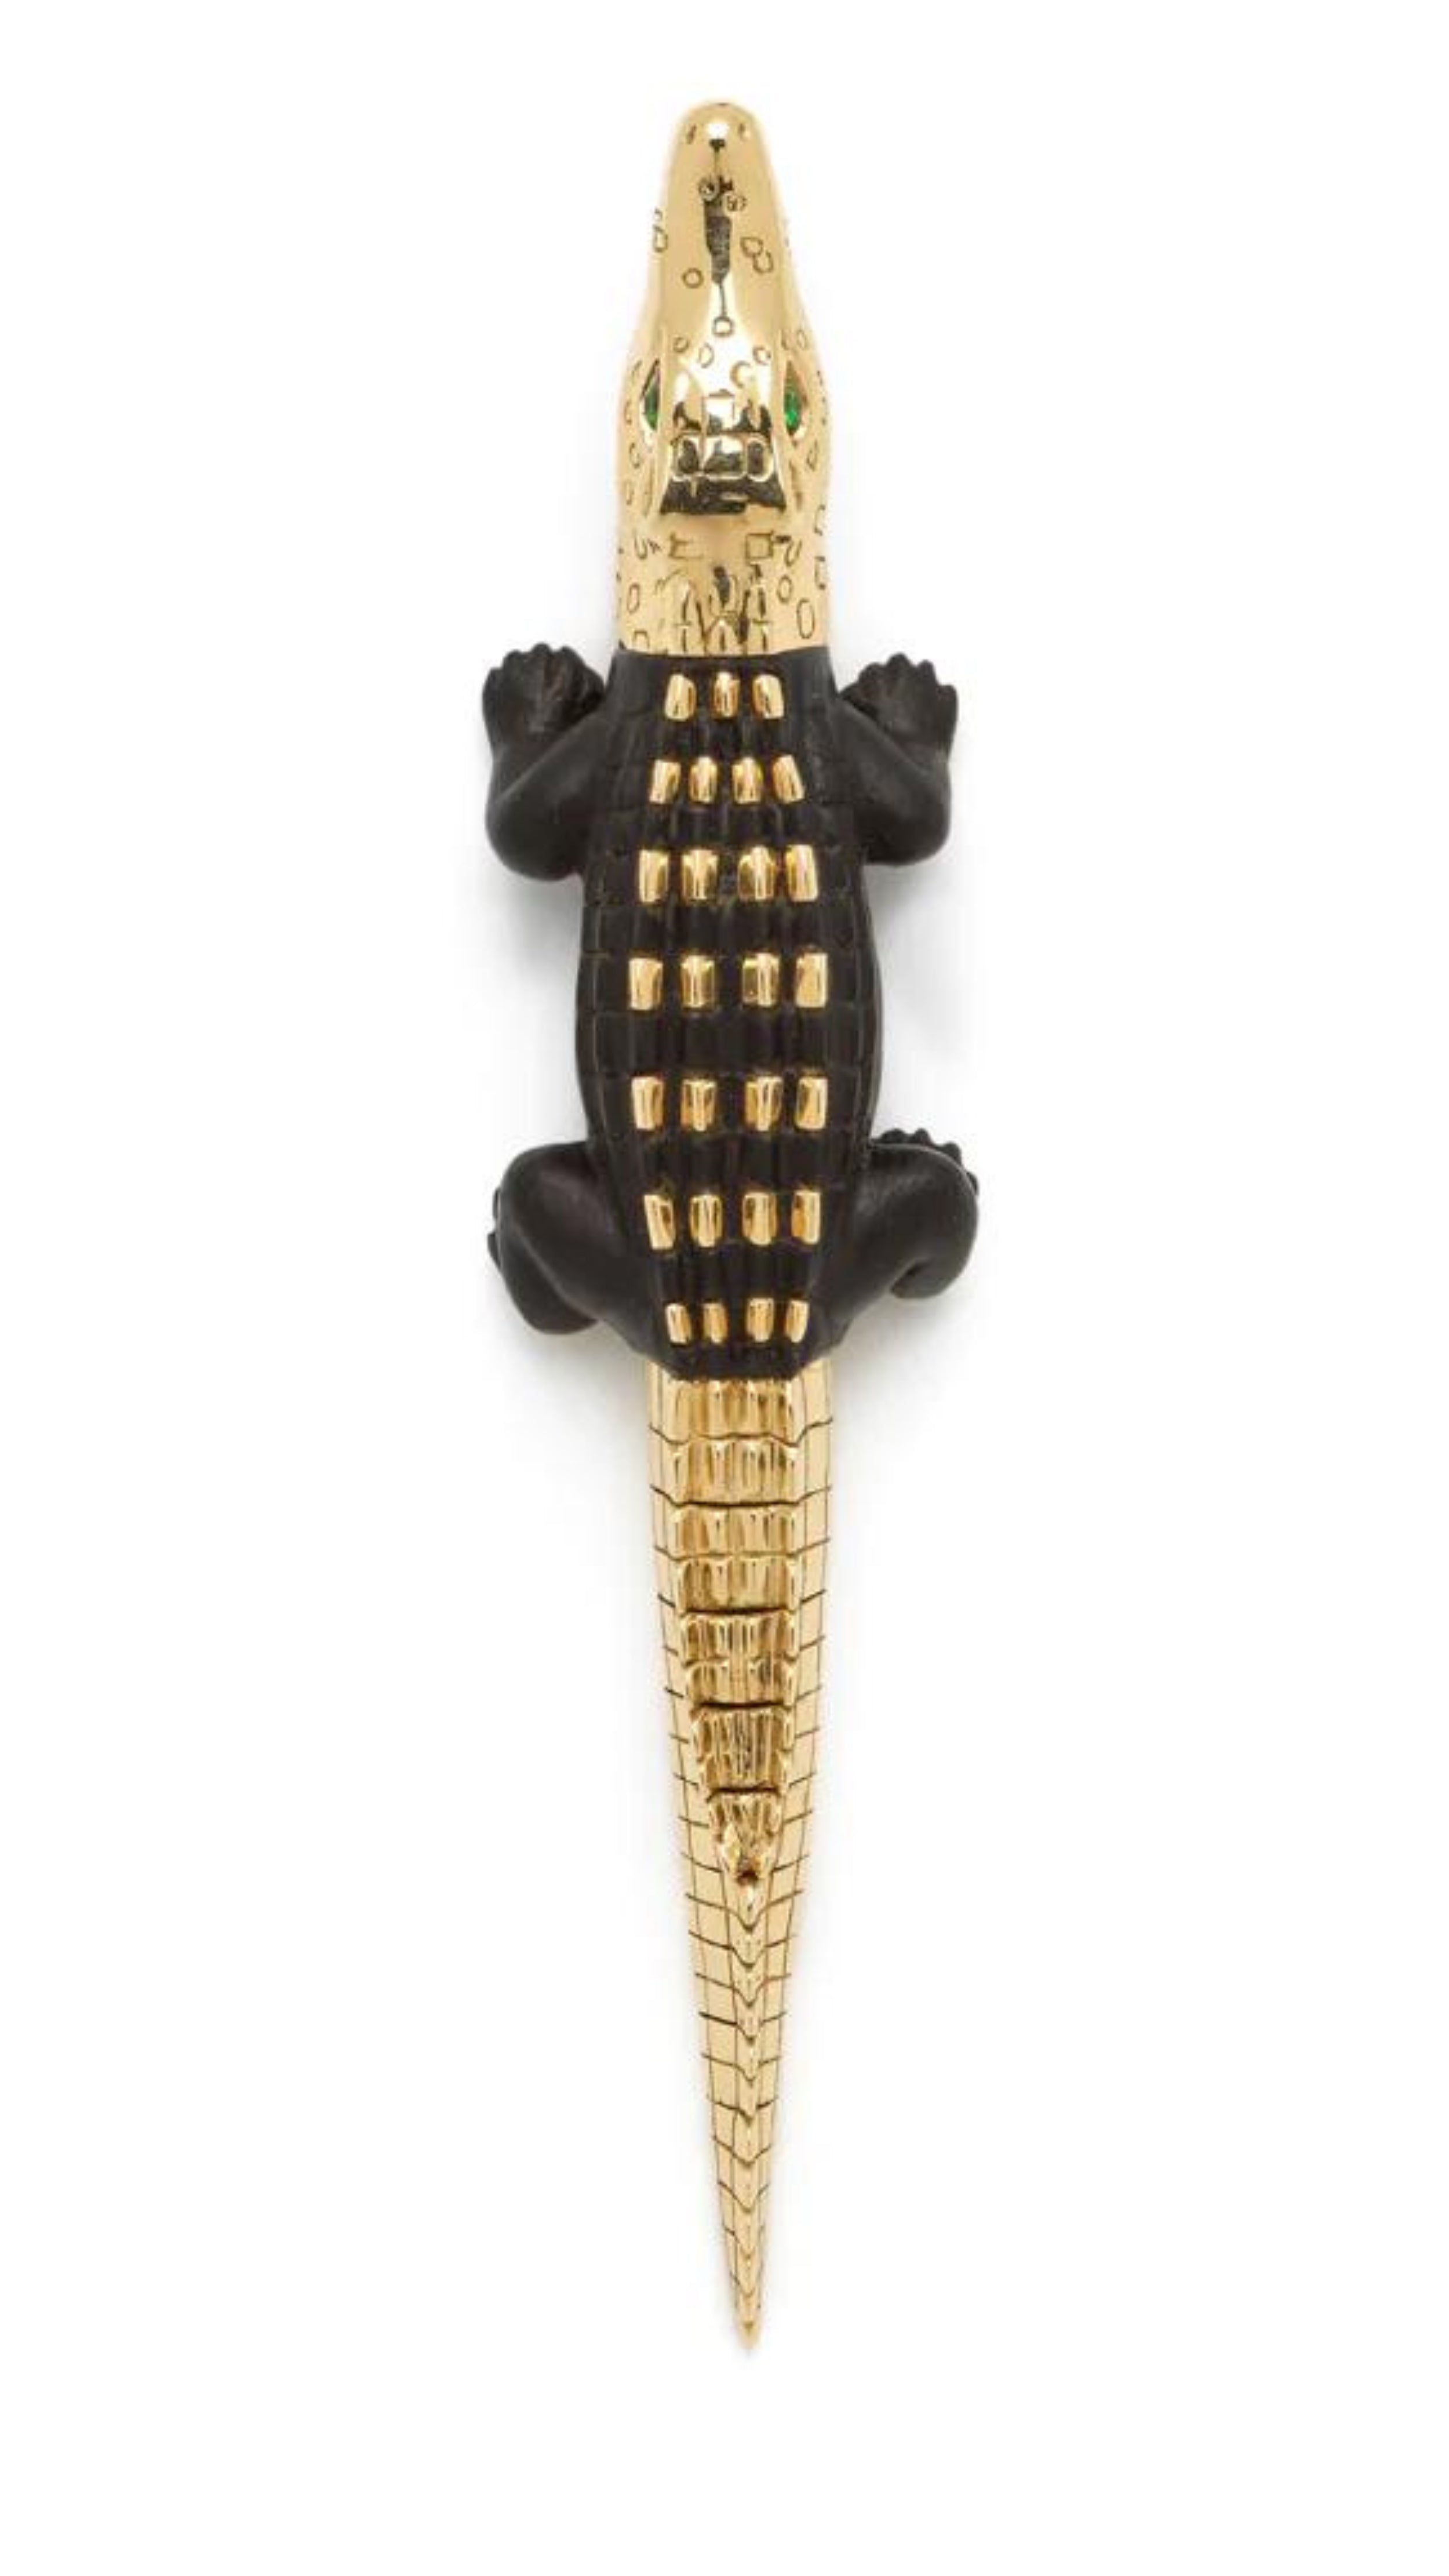 Bibi van der Velden, Ebony Wood Large Alligator Bite Earring with Studs. Crafted in 18K Gold and with an ebony wood body in the shape of an alligator. The gold head is highlighted with green tsavorite stones. The tail is gold scaled. Shown from the top view.